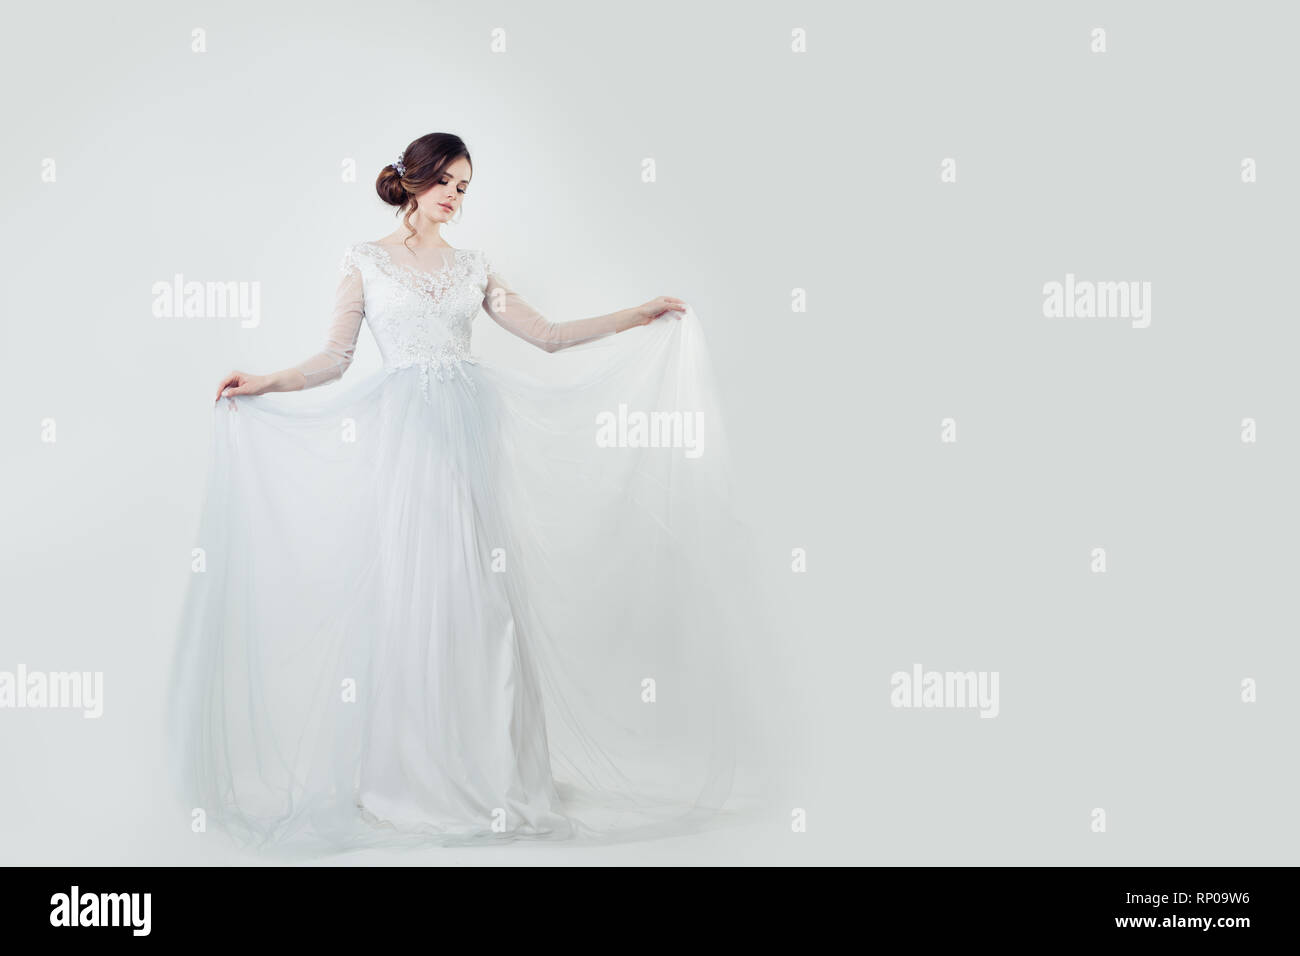 Bride woman in wedding dress on white banner background Stock Photo - Alamy